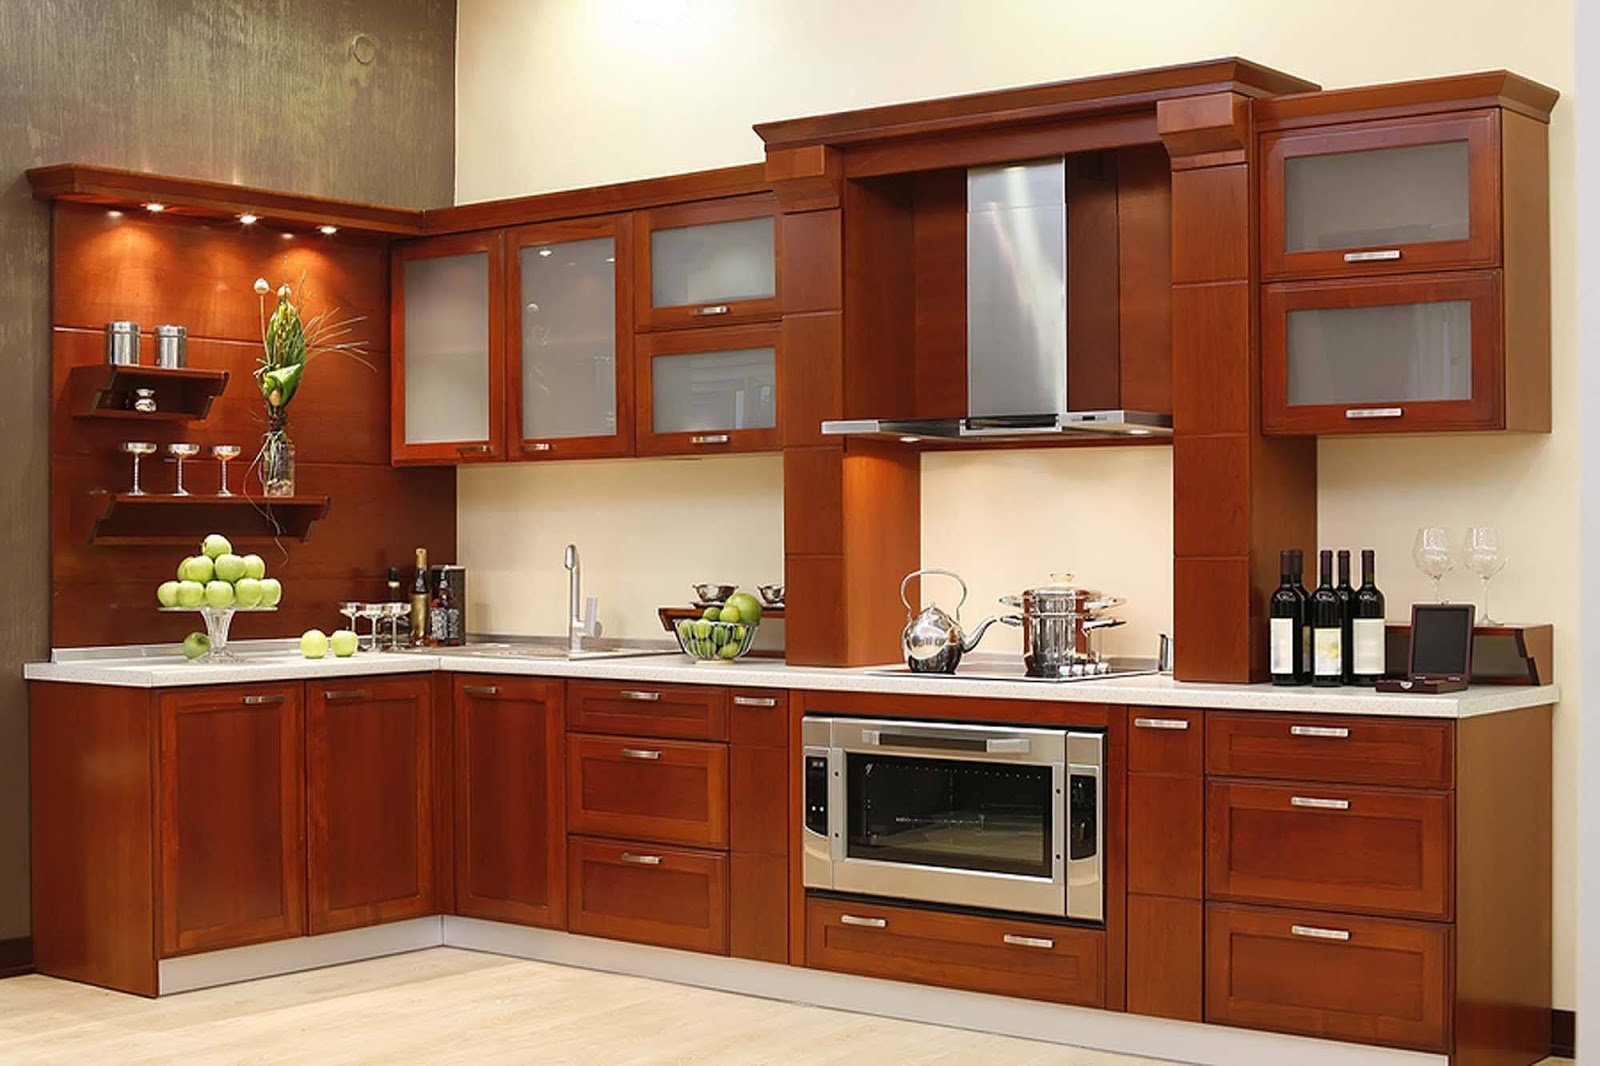 If You Looking For Best Modern Wooden Kitchen Cabinet Design, This Will